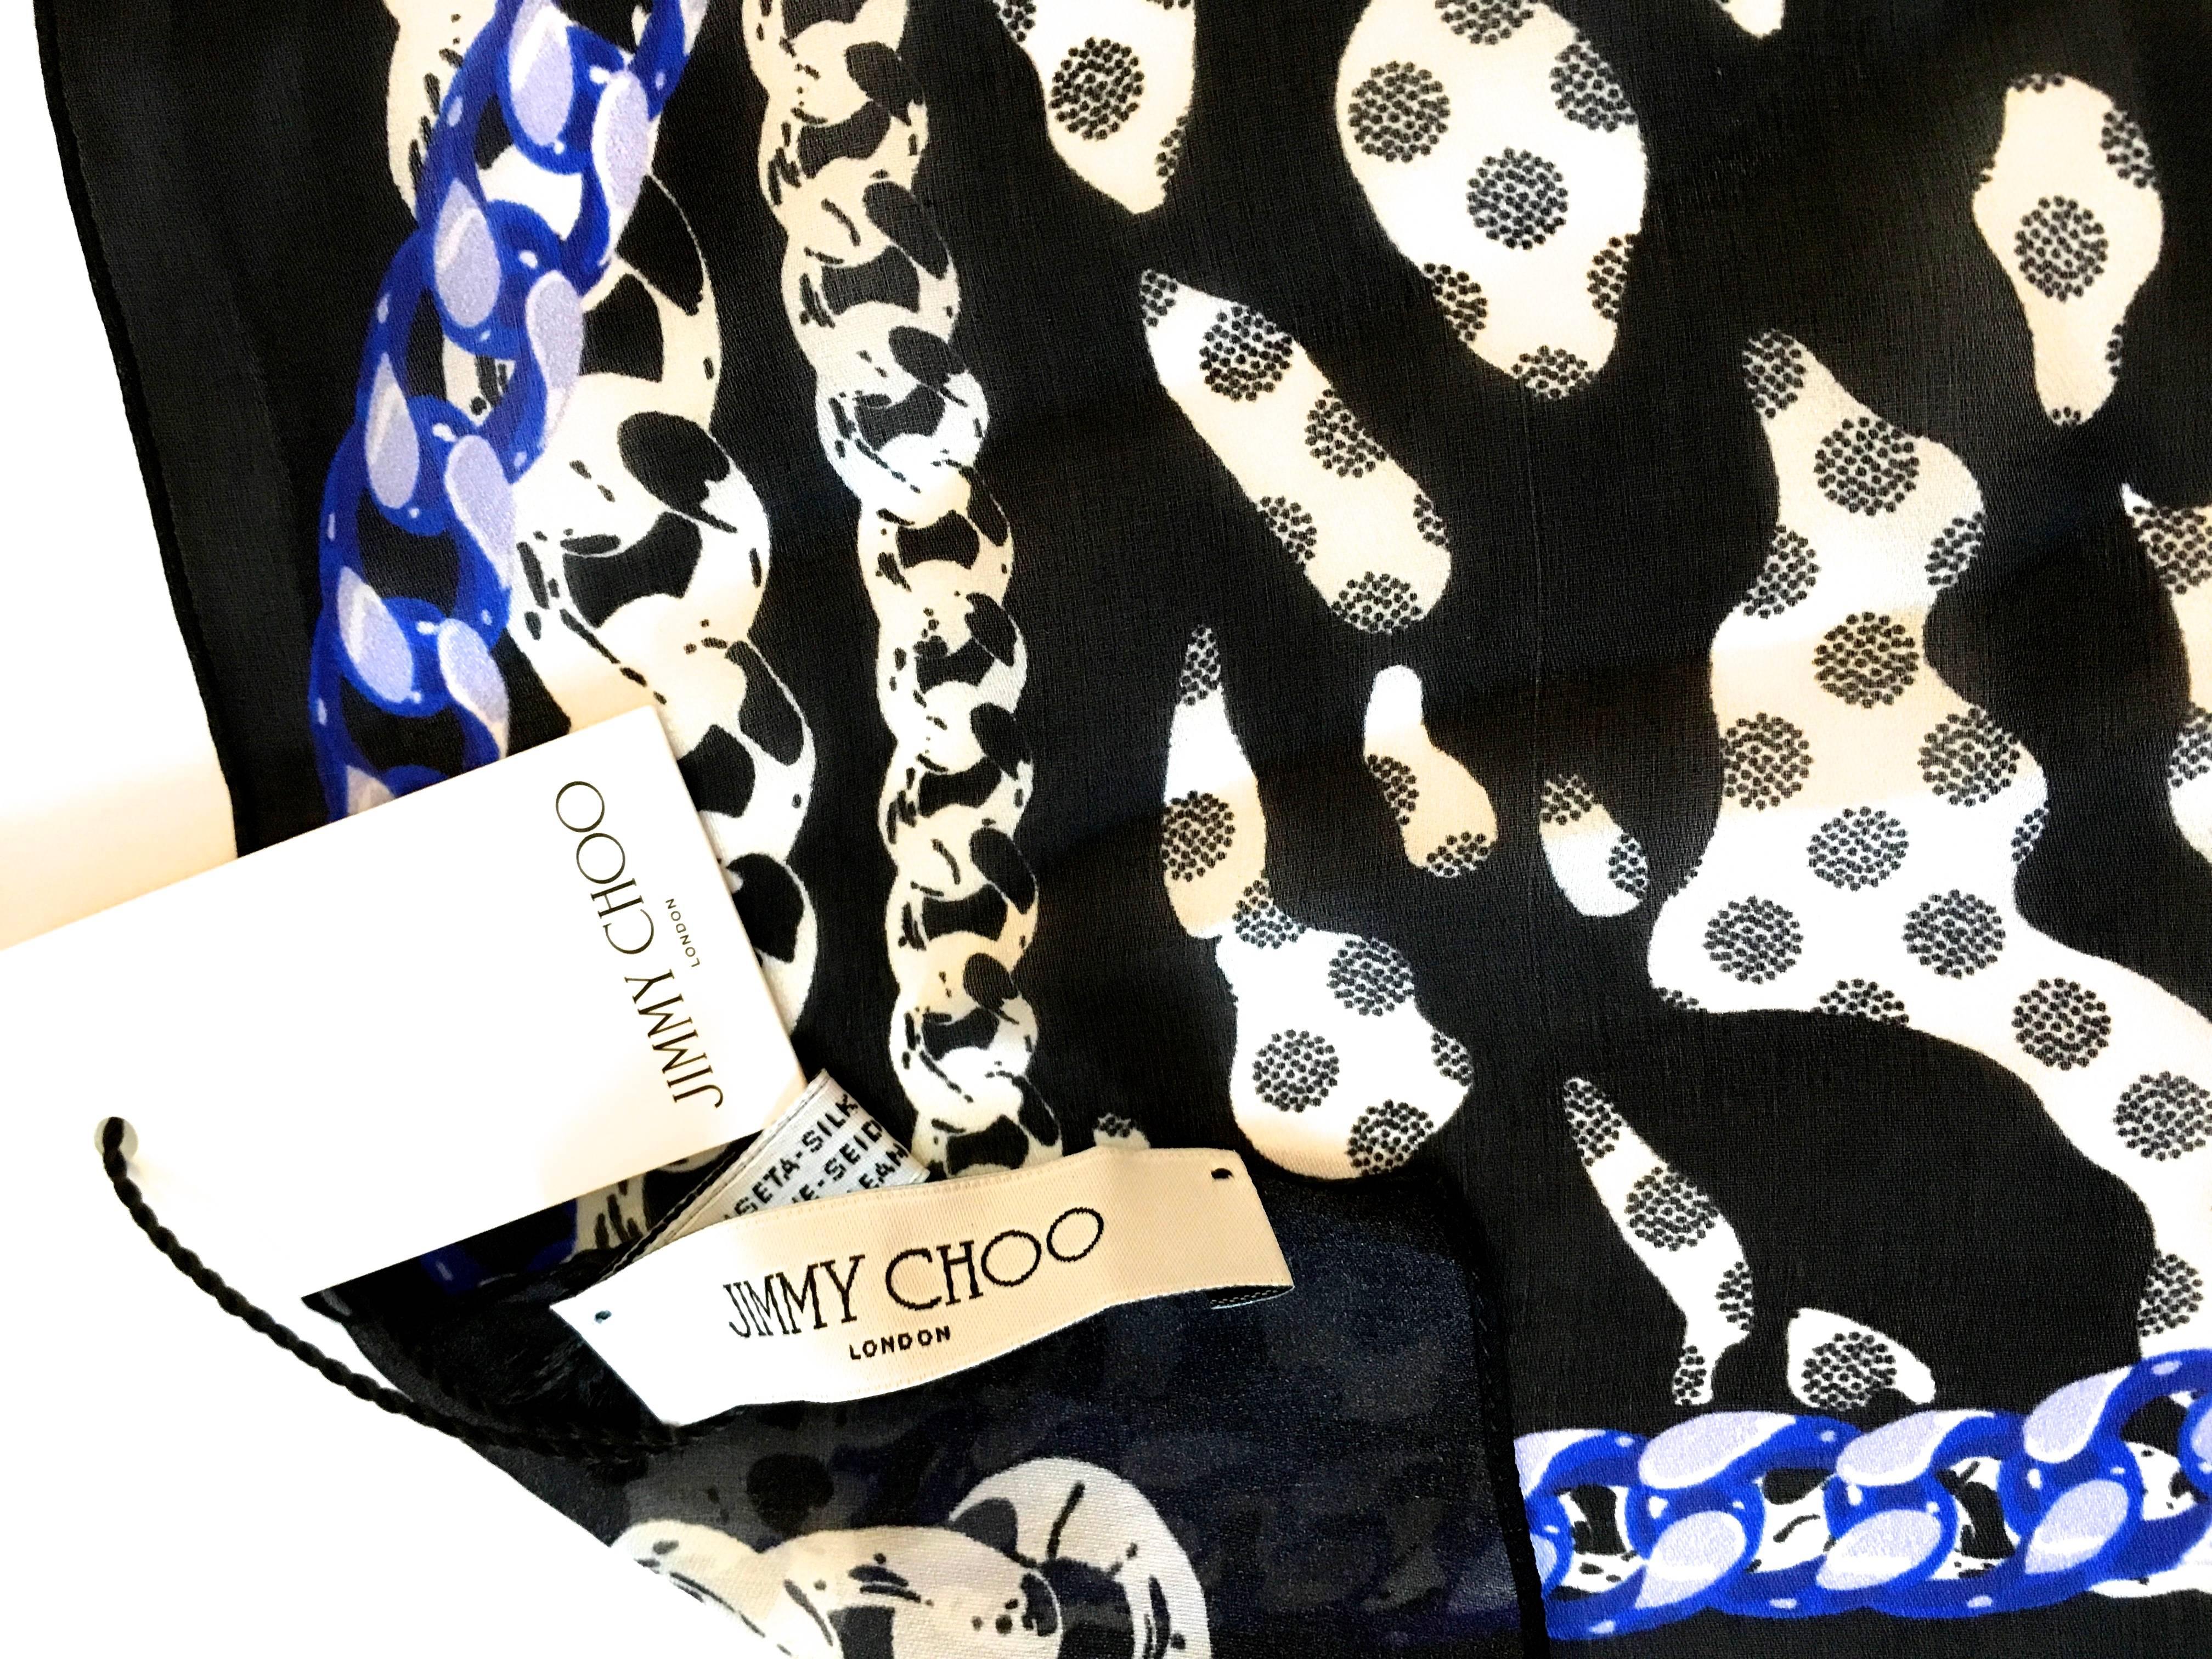 Presented here is an absolutely fabulous Jimmy Choo shawl with the tags on it. It is signed 'Jimmy Choo' on the bottom right. The shawl has a black background with a center free form design of white with various black non-representational images